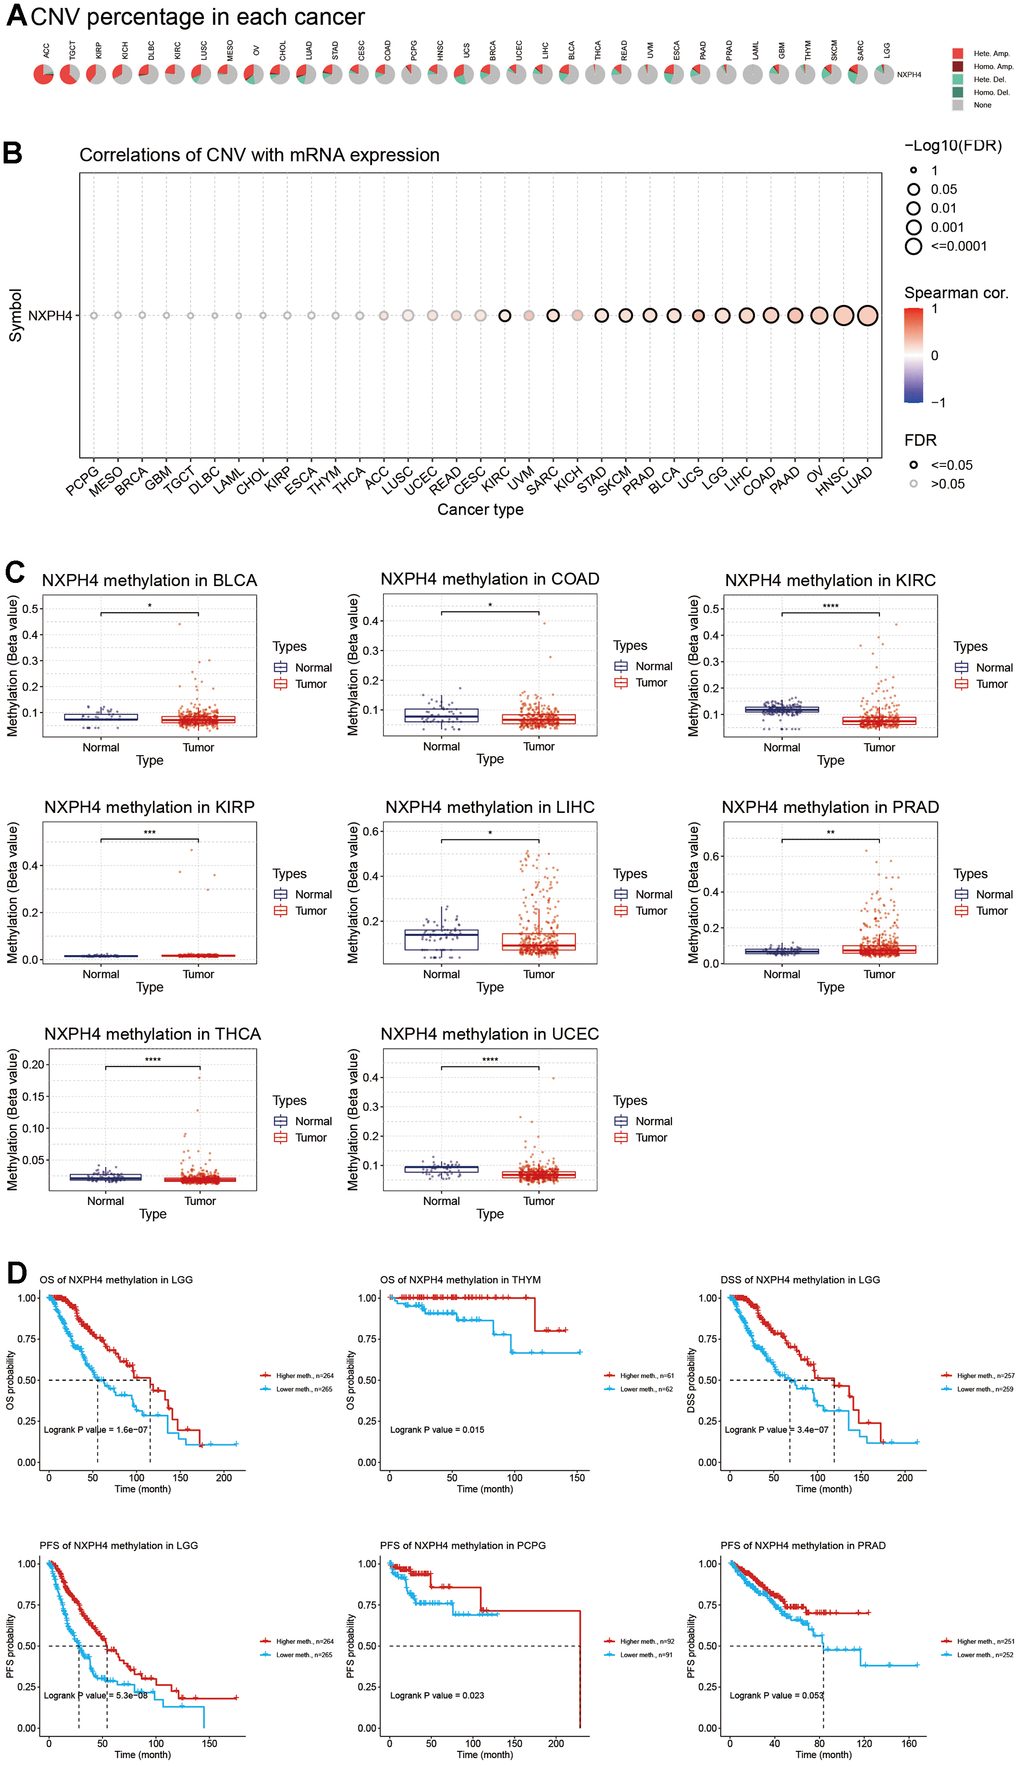 Copy number variation and methylation of NXPH4 in pan-cancer. (A) Copy number variation in NXPH4 in pan-cancer. (B) Correlation between copy number variation and mRNA expression level of NXPH4 in pan-cancer. (C) Differential methylation levels of NXPH4 between pan-cancers and corresponding paracancer tissues. (D) Relationship between NXPH4 methylation levels and prognosis in pan-cancers.